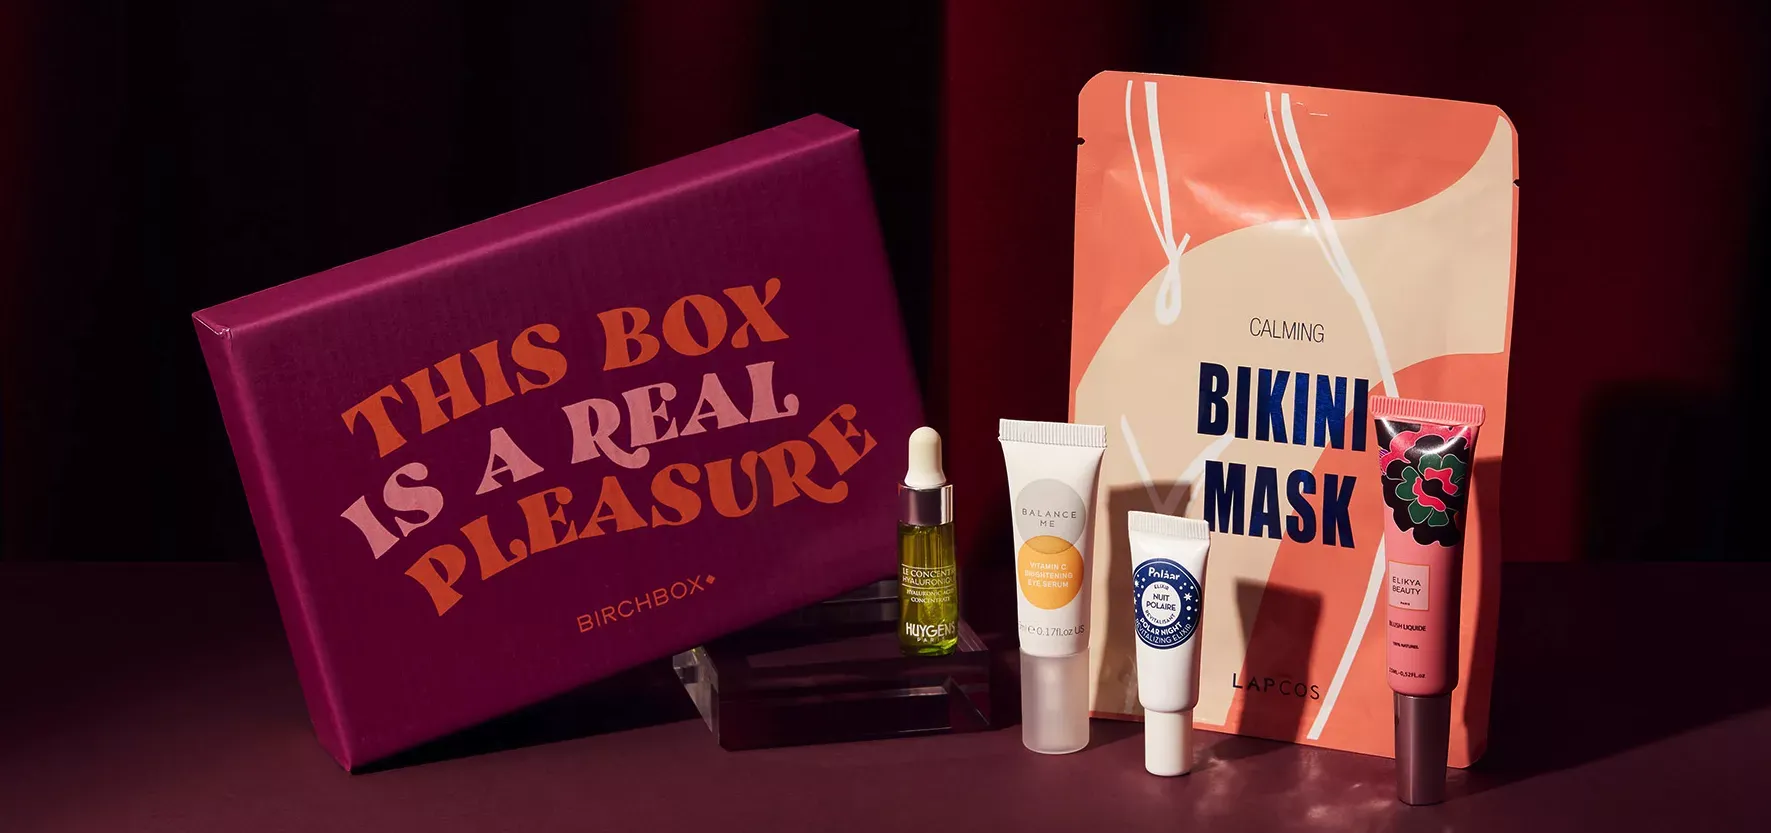 Birchbox is an example of successful lead gen through content marketing